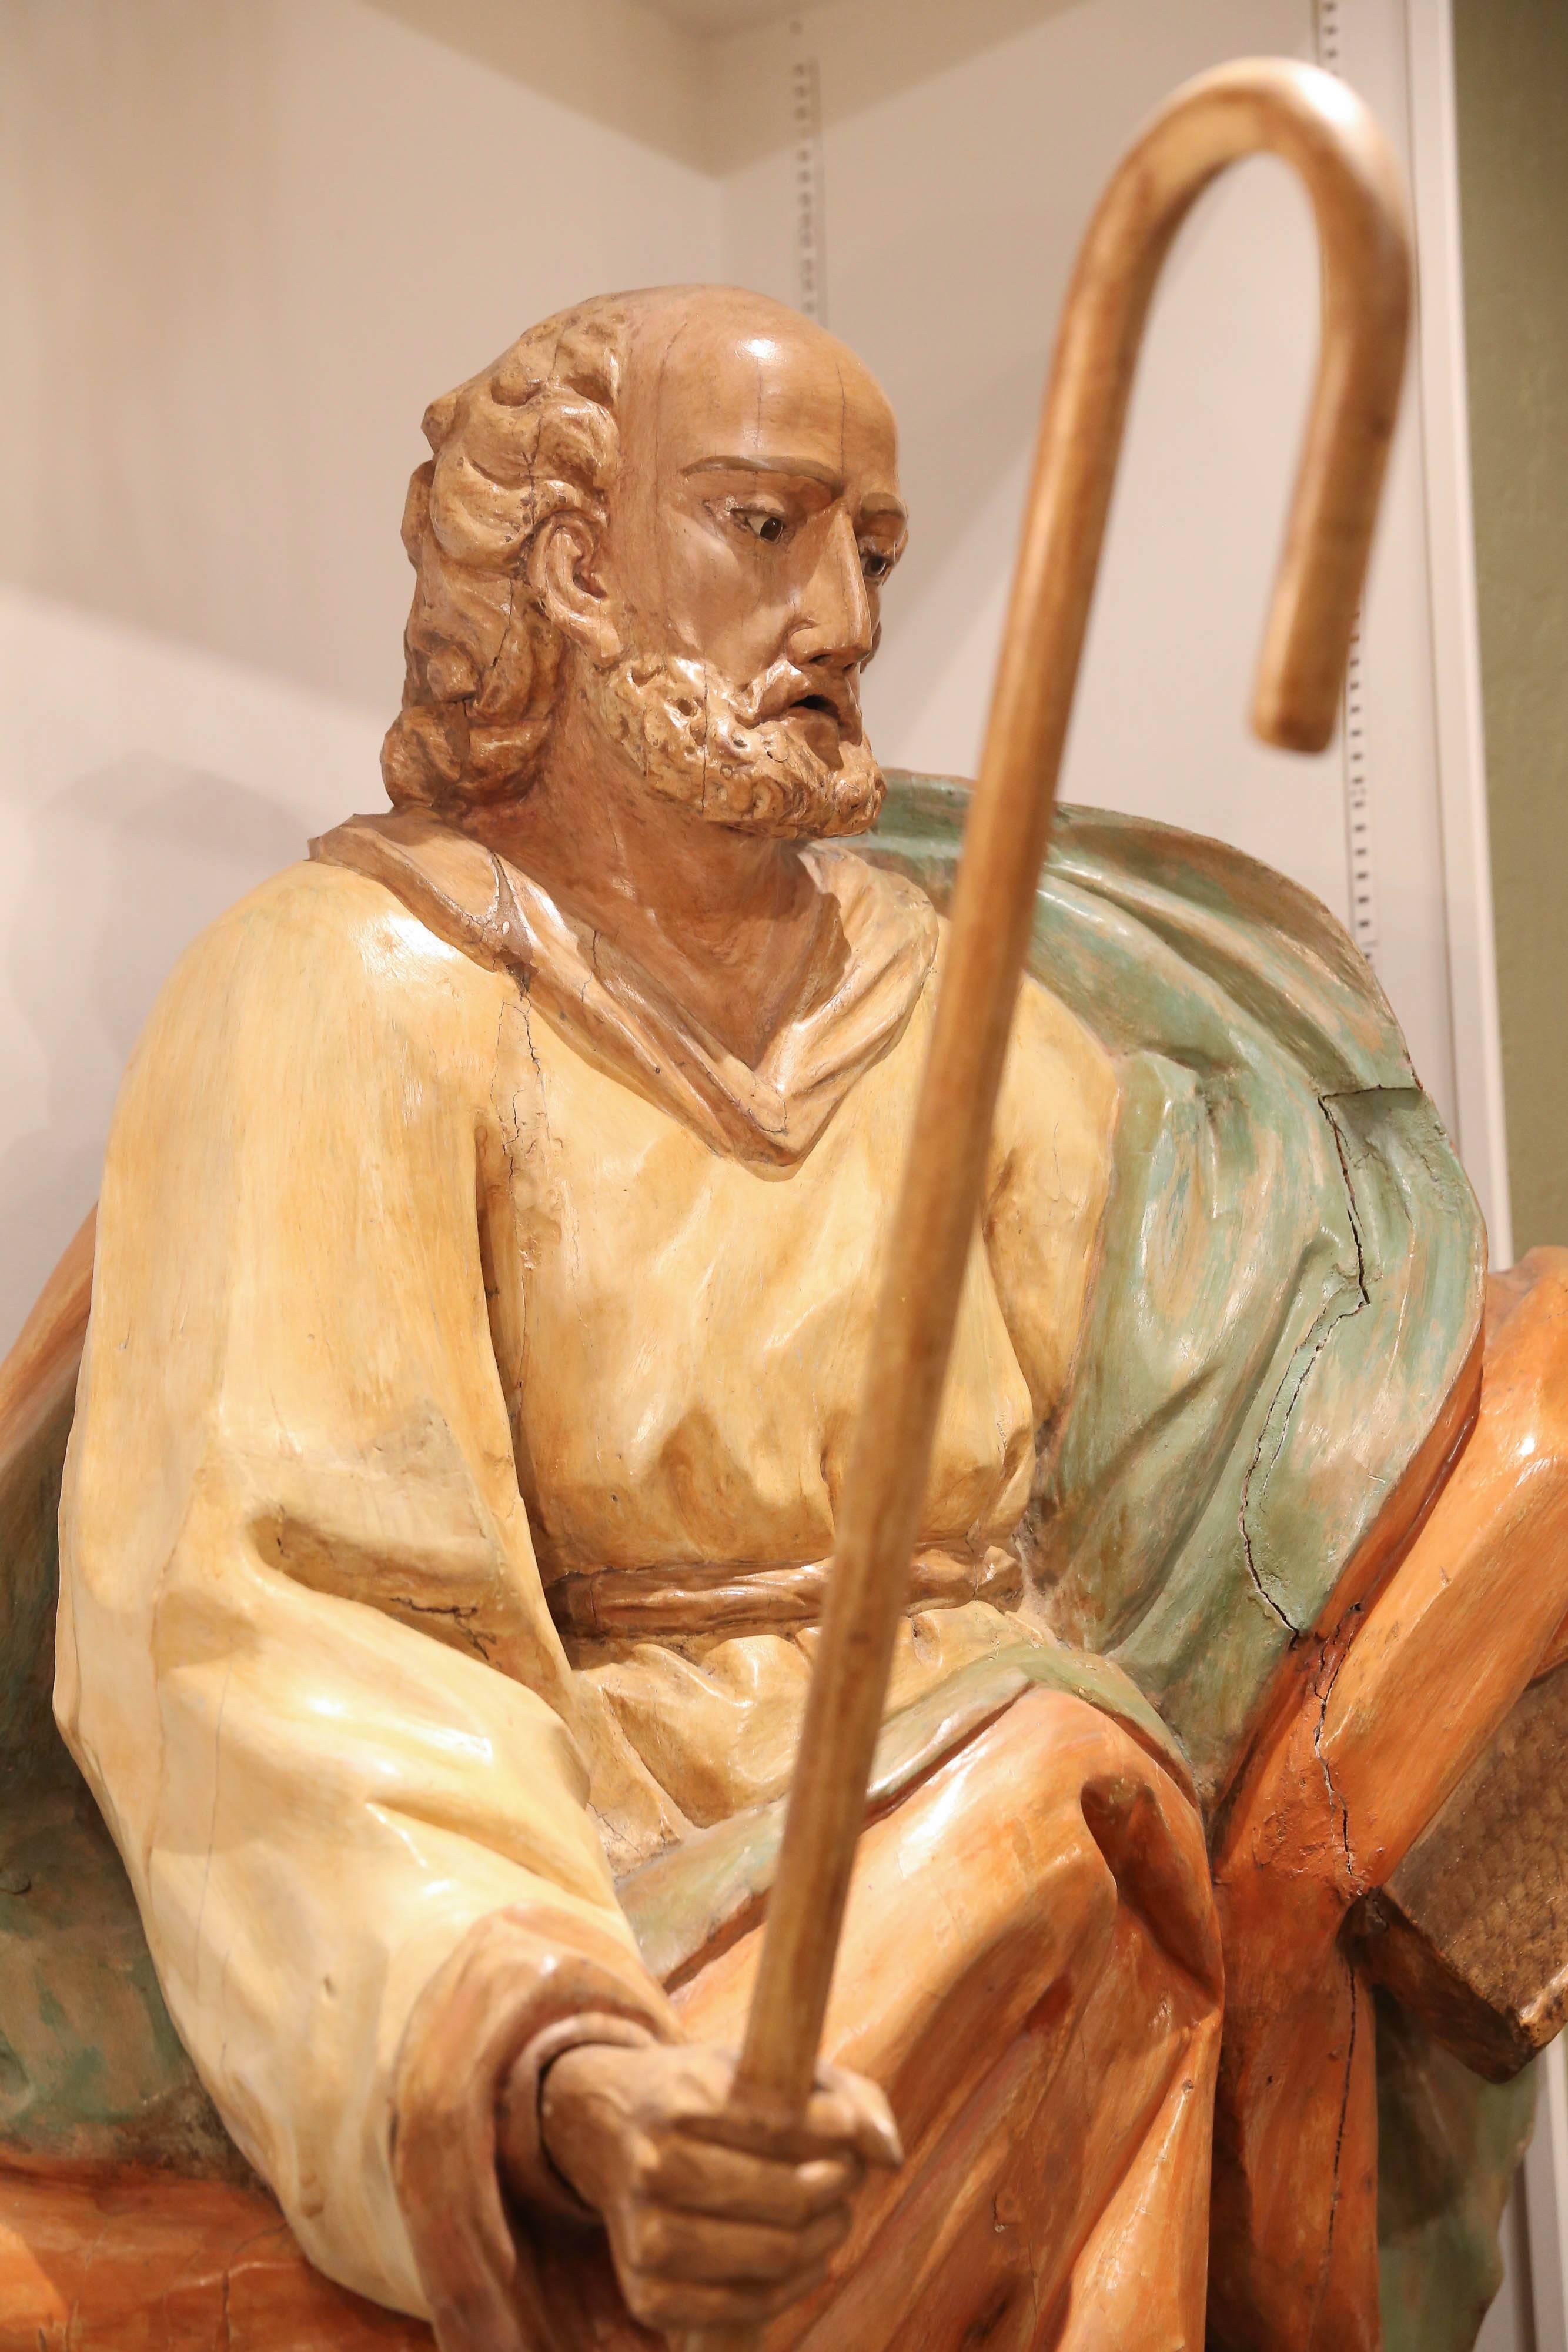 Large wooden statue from Italy depicting a disciple. Clothed in robes of
gold, russet and green colors. The figure holding a bible in one hand
and a staff in the other hand.